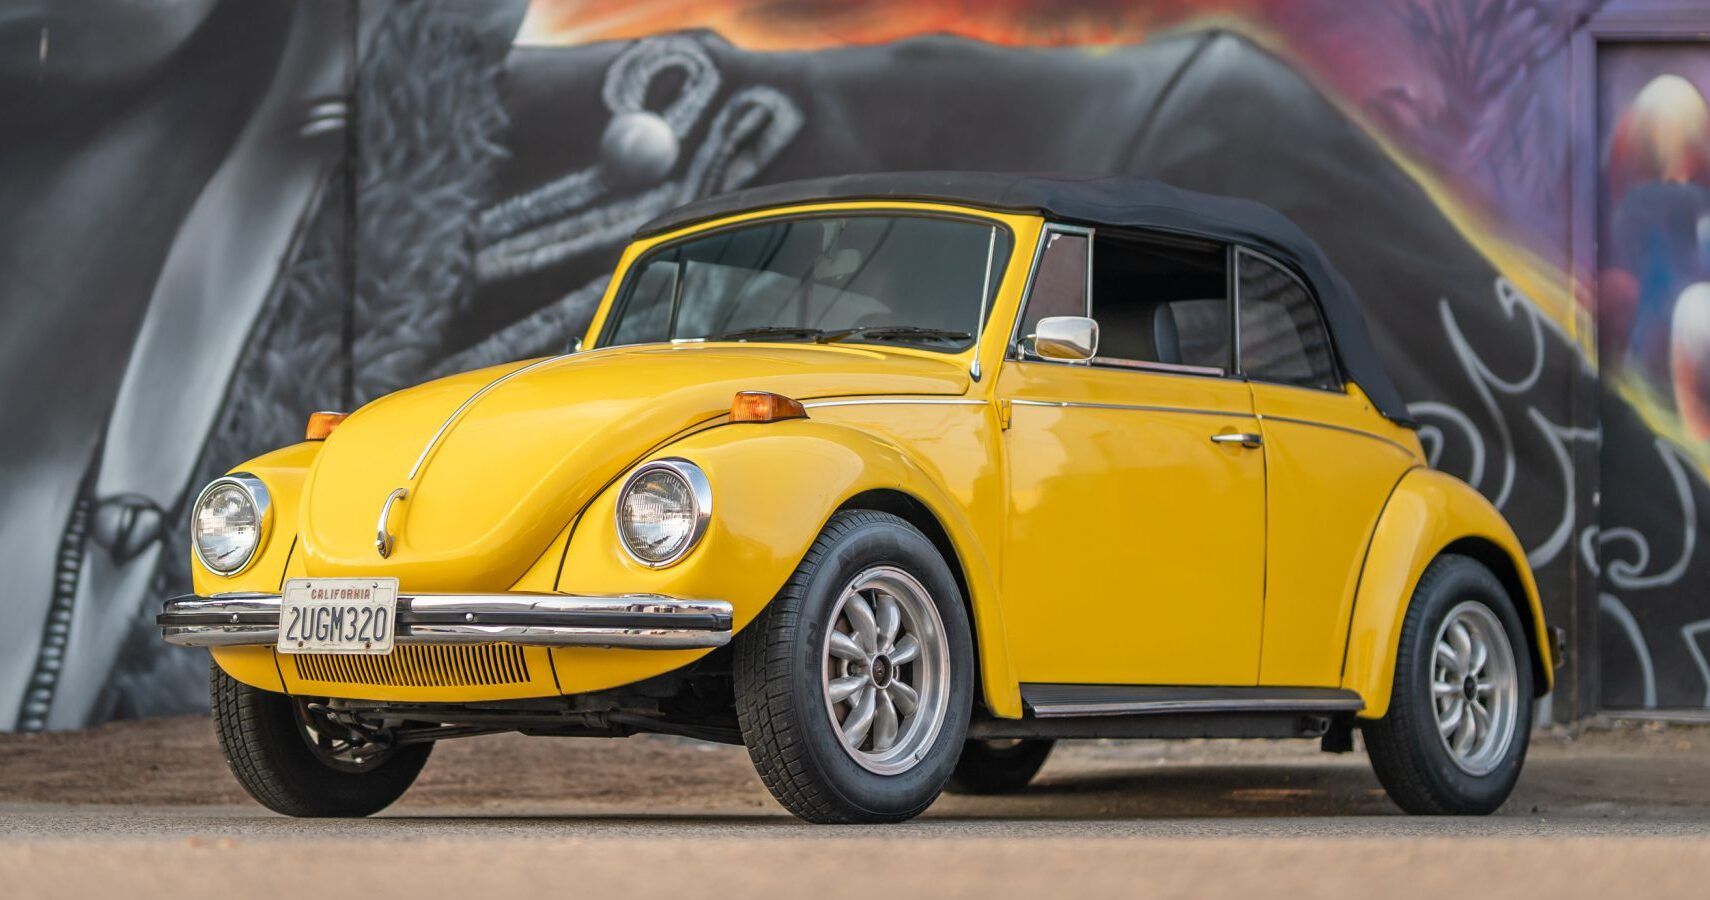 A yellow 1972 Volkswagen Beetle parked